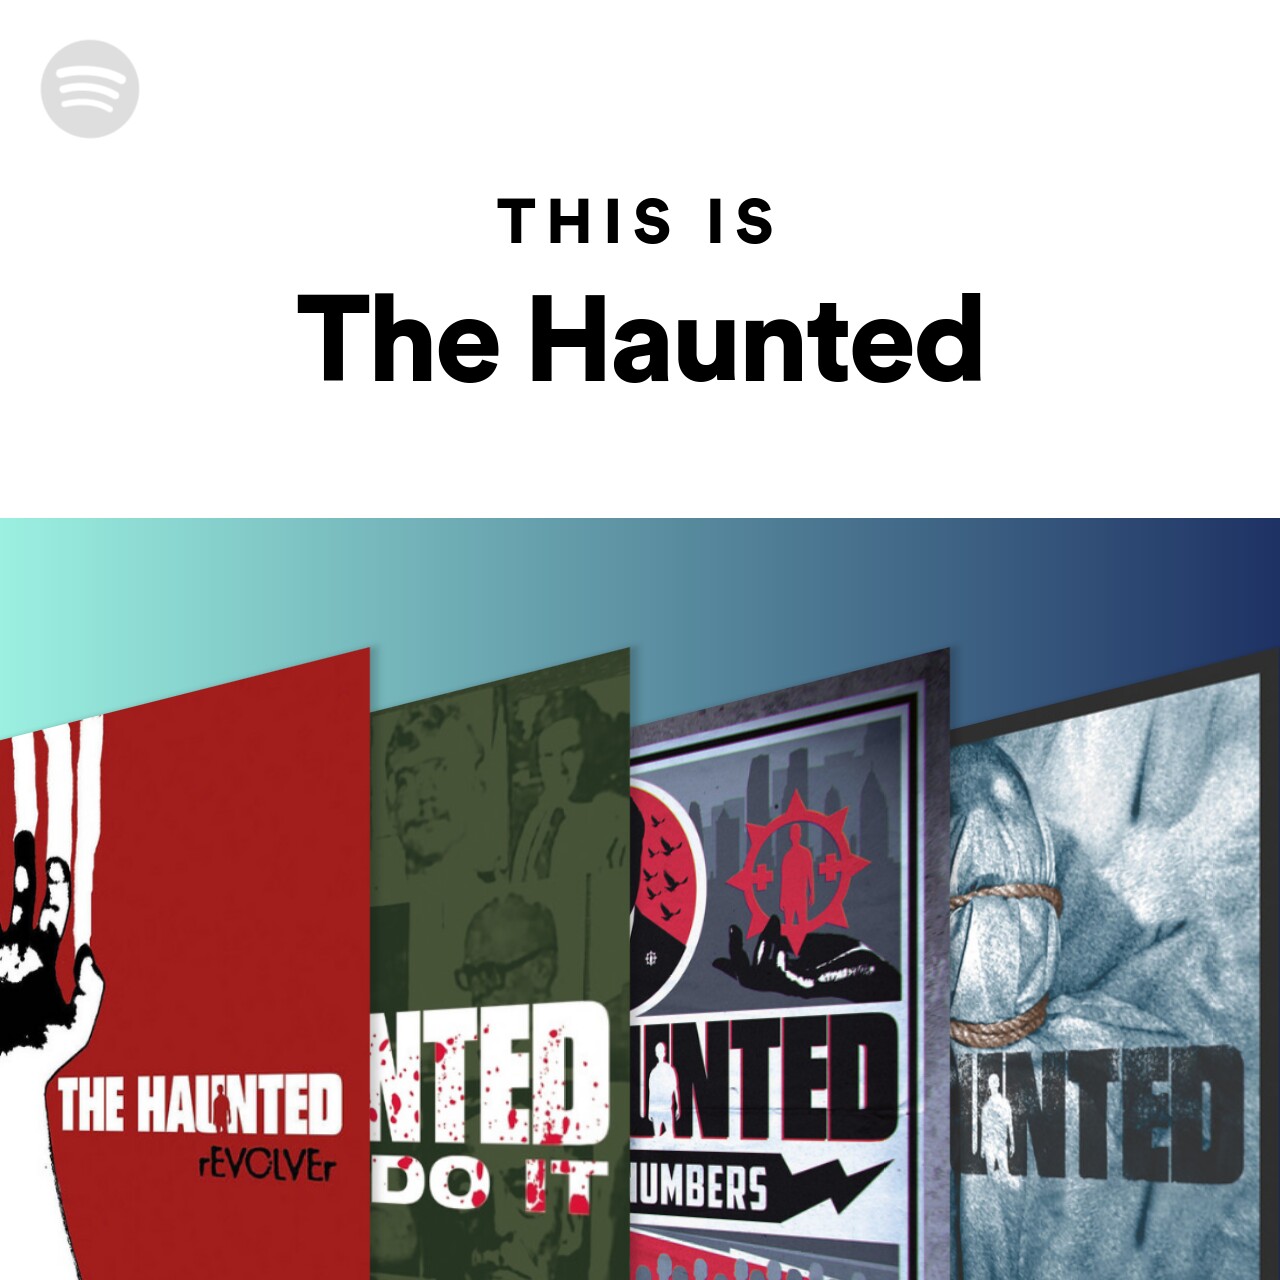 This Is The Haunted